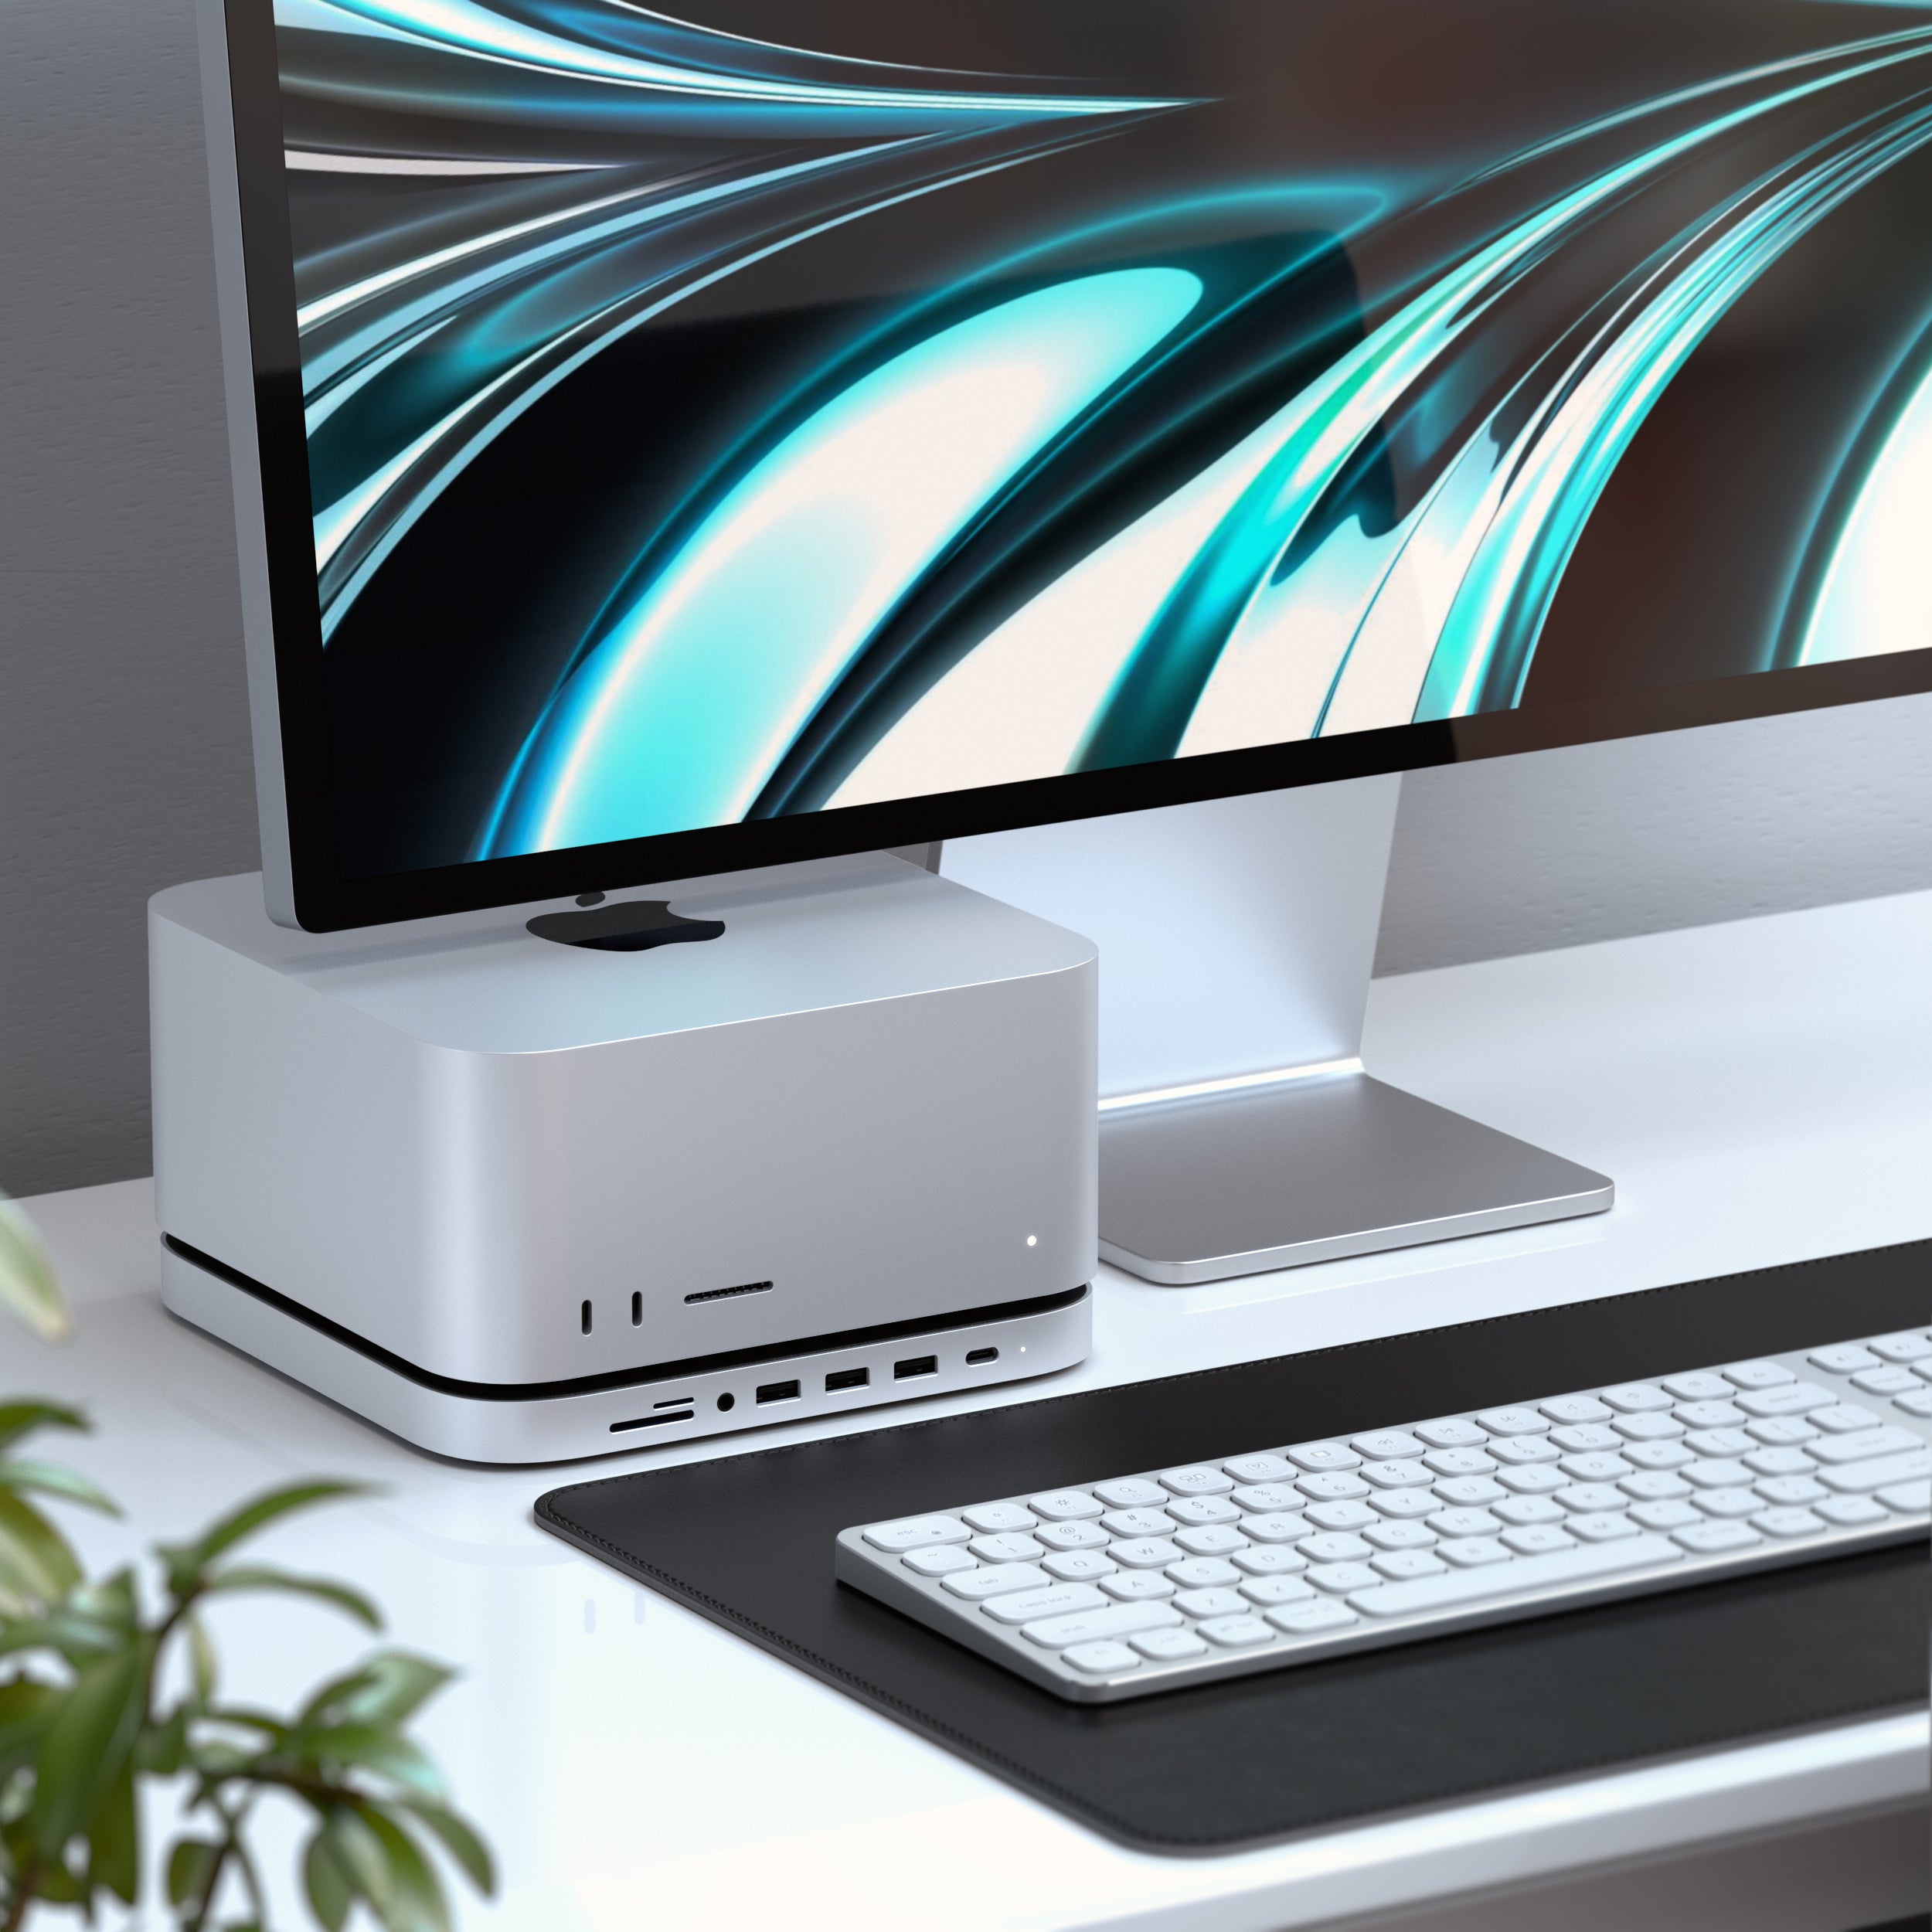 The Satechi Stand & Hub for Mac mini with SSD Enclosure elevates and transforms your M1 Mac Mini into a powerful, surprisingly compact workstation